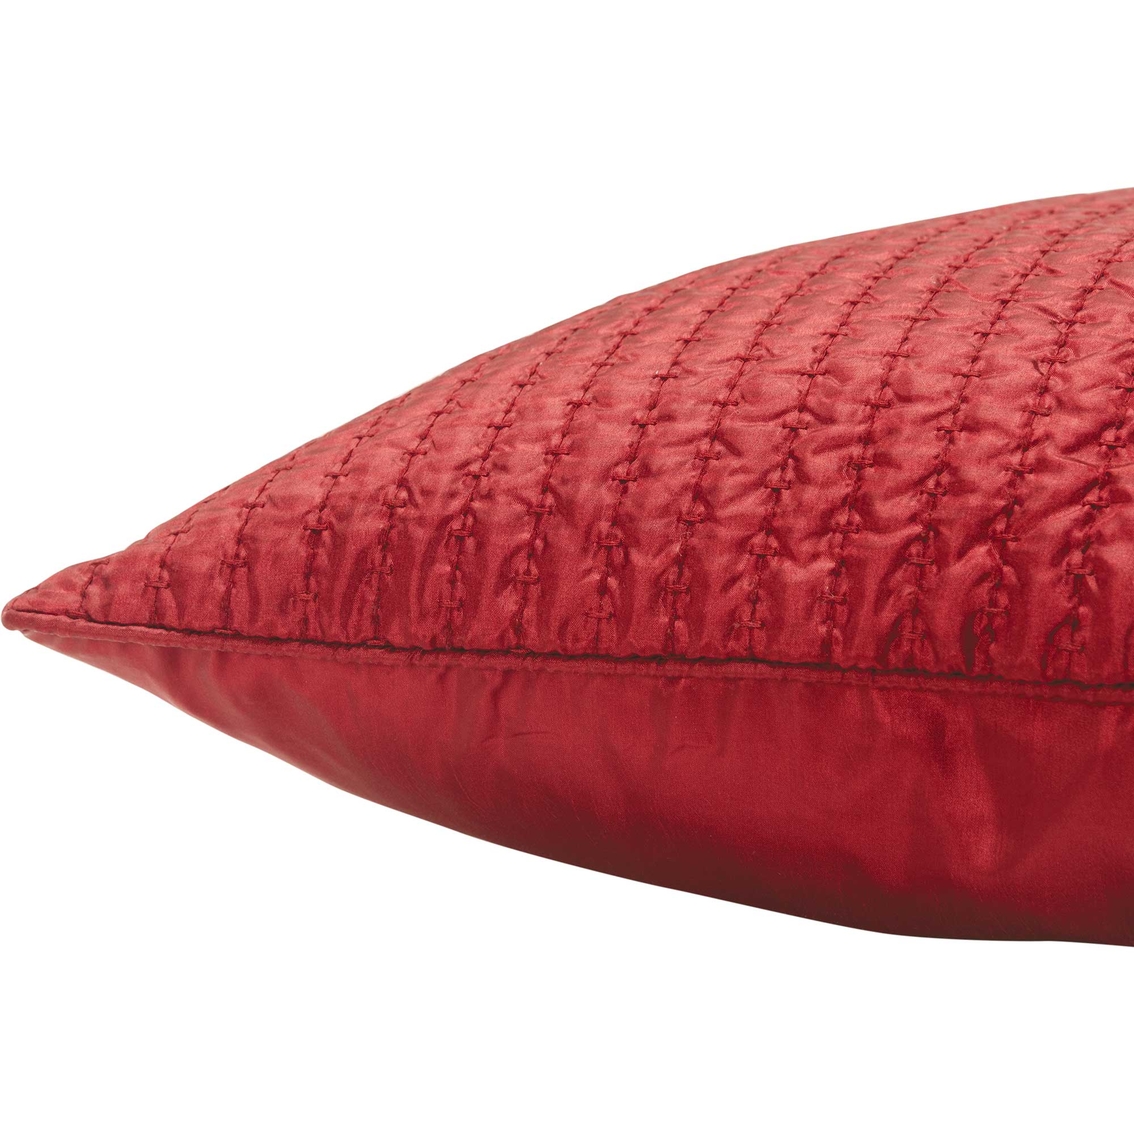 Rizzy Home Solid Deep Red Polyester Filled Pillow - Image 3 of 5